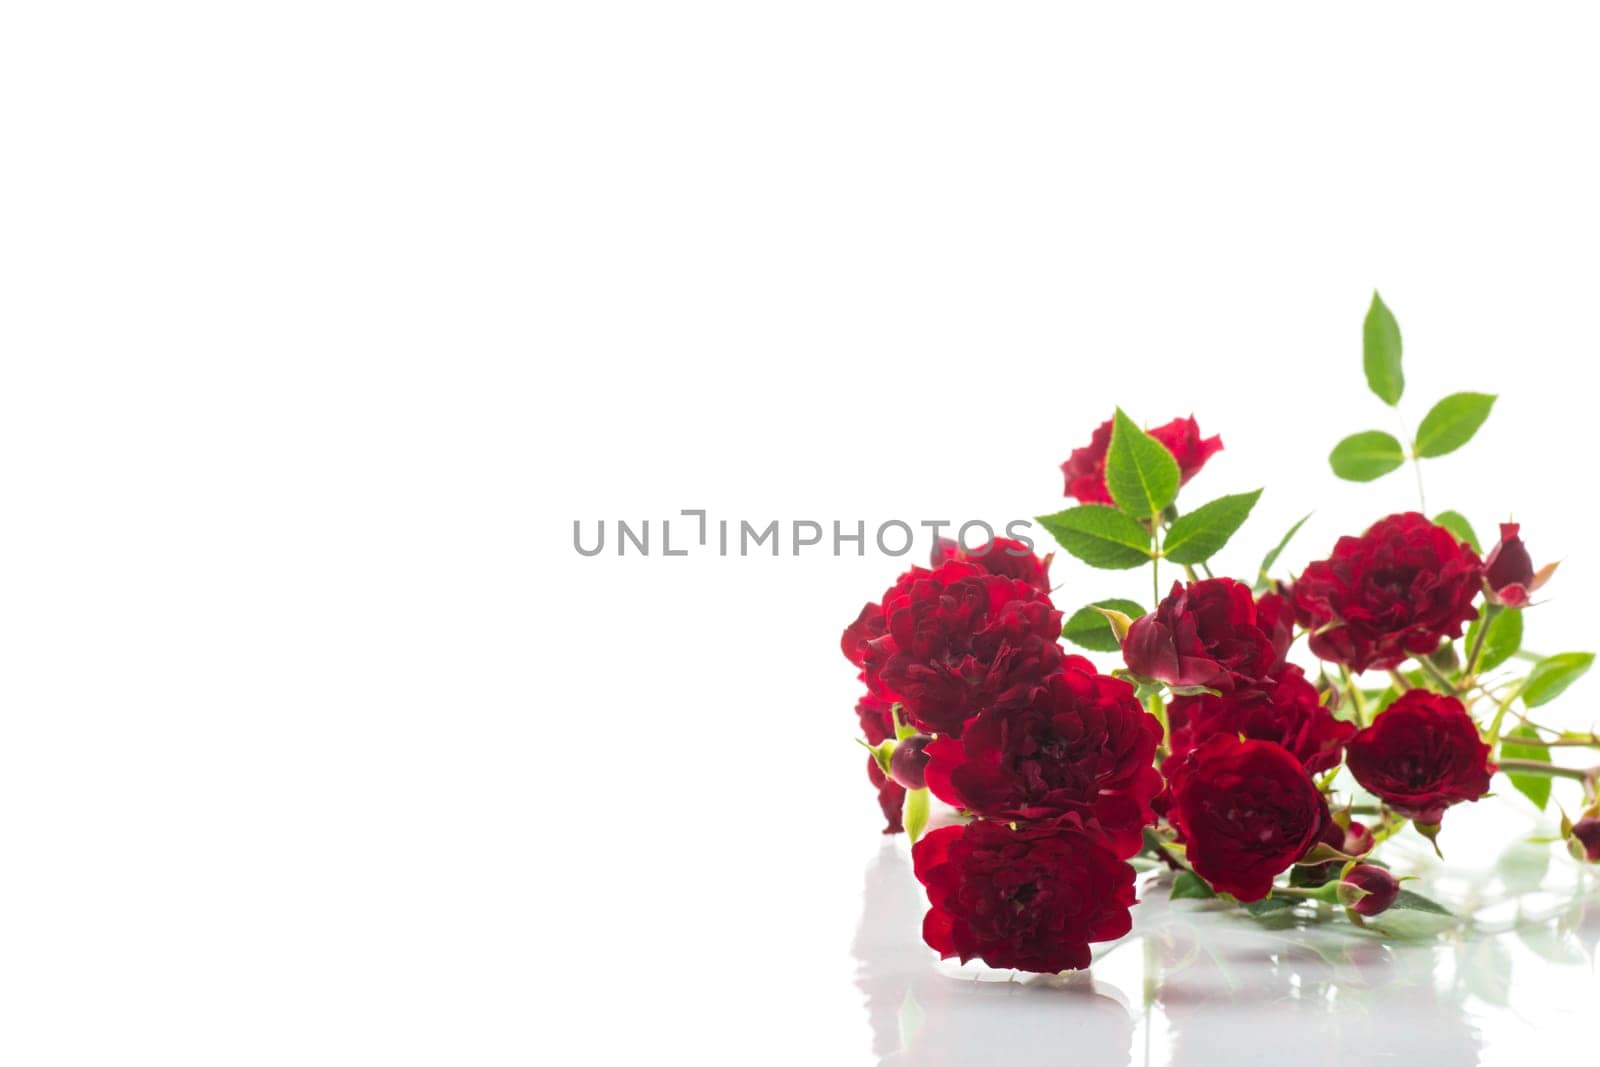 bouquet of red small roses, isolated on white background.